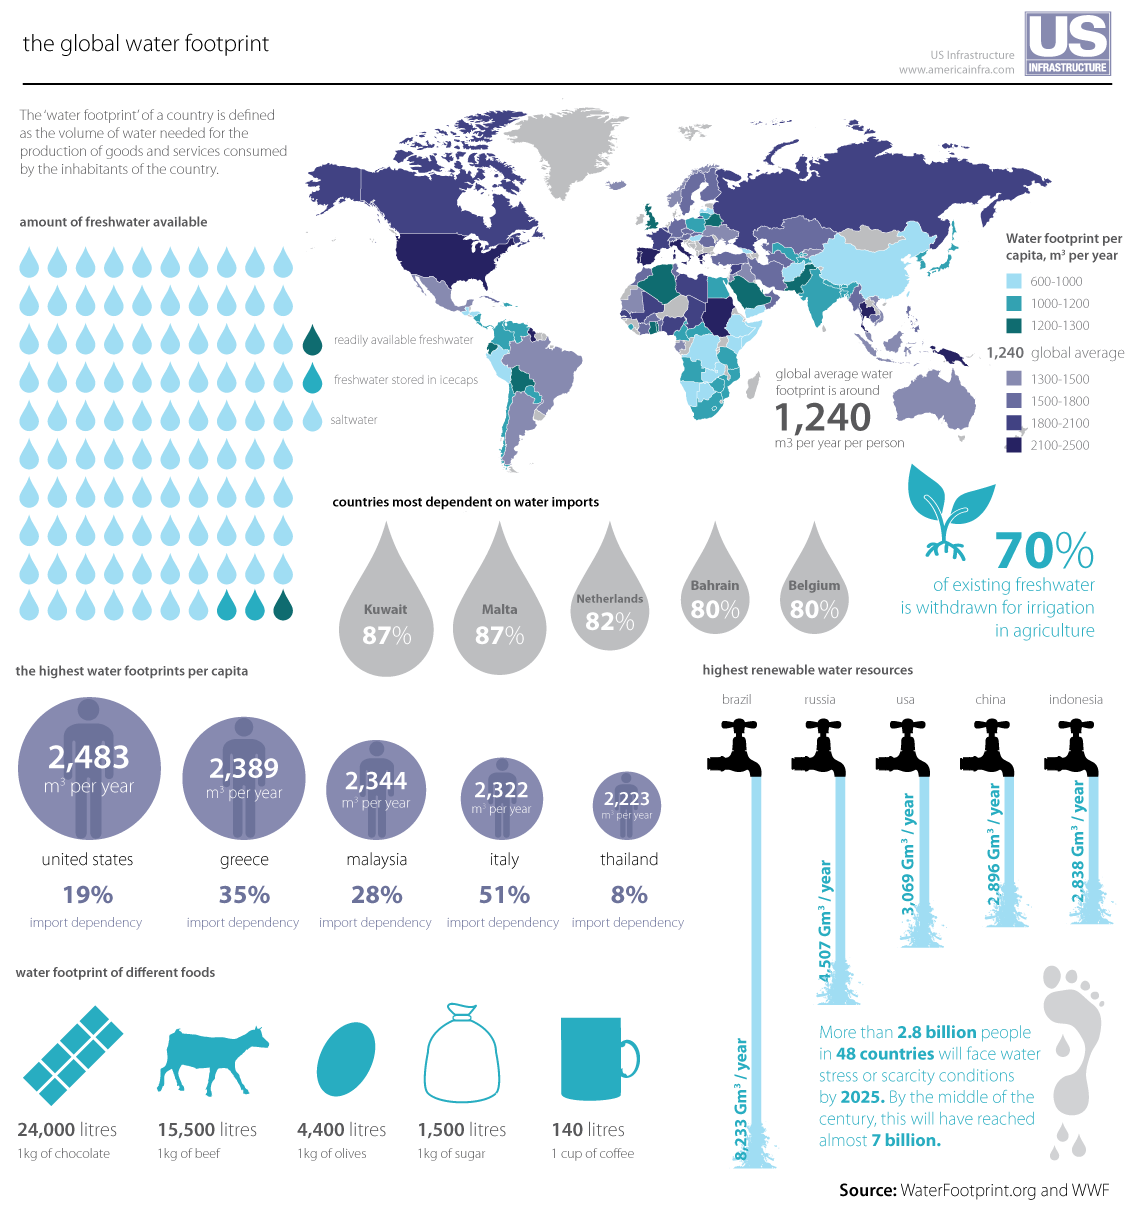 US
the global water footprint
US Infrastructure
www.americainfra.com
INFRASTRUCTURE
The 'water footprint' of a country is defined
as the volume of water needed for the
production of goods and services consumed
by the inhabitants of the country.
amount of freshwater available
Water footprint per
capita, m per year
600-1000
1000-1200
1200-1300
readily available freshwater
1,240 global average
global average water
footprint is around
freshwater stored in icecaps
1300-1500
1500-1800
1,240
saltwater
1800-2100
m3 per year per person
2100-2500
countries most dependent on water imports
xh 70%
of existing freshwater
is withdrawn for irrigation
in agriculture
Bahrain
Belgium
Netherlands
80%
80%
Kuwait
Malta
82%
87%
87%
the highest water footprints per capita
highest renewable water resources
brazil
russia
usa
china
indonesia
2,483
2,389
2,344
m' per year
m' per year
2,322
m' per year
m³ per year
2,223
m per year
united states
greece
malaysia
italy
thailand
19%
35%
28%
51%
8%
import dependency
import dependency
import dependency import dependency import dependency
water footprint of different foods
More than 2.8 billion people
in 48 countries will face water
stress or scarcity conditions
by 2025. By the middle of the
century, this will have reached
almost 7 billion.
24,000 litres
15,500 litres
4,400 litres
1,500 litres
140 litres
1kg of chocolate
1kg of beef
1kg of olives
1kg of sugar
1 cup of coffee
Source: WaterFootprint.org and wWF
8,233 Gm³ / year
4,507 Gm³ / year
3,069 Gm³ / year
2,896 Gm³ / year
838 Gm³ / year
